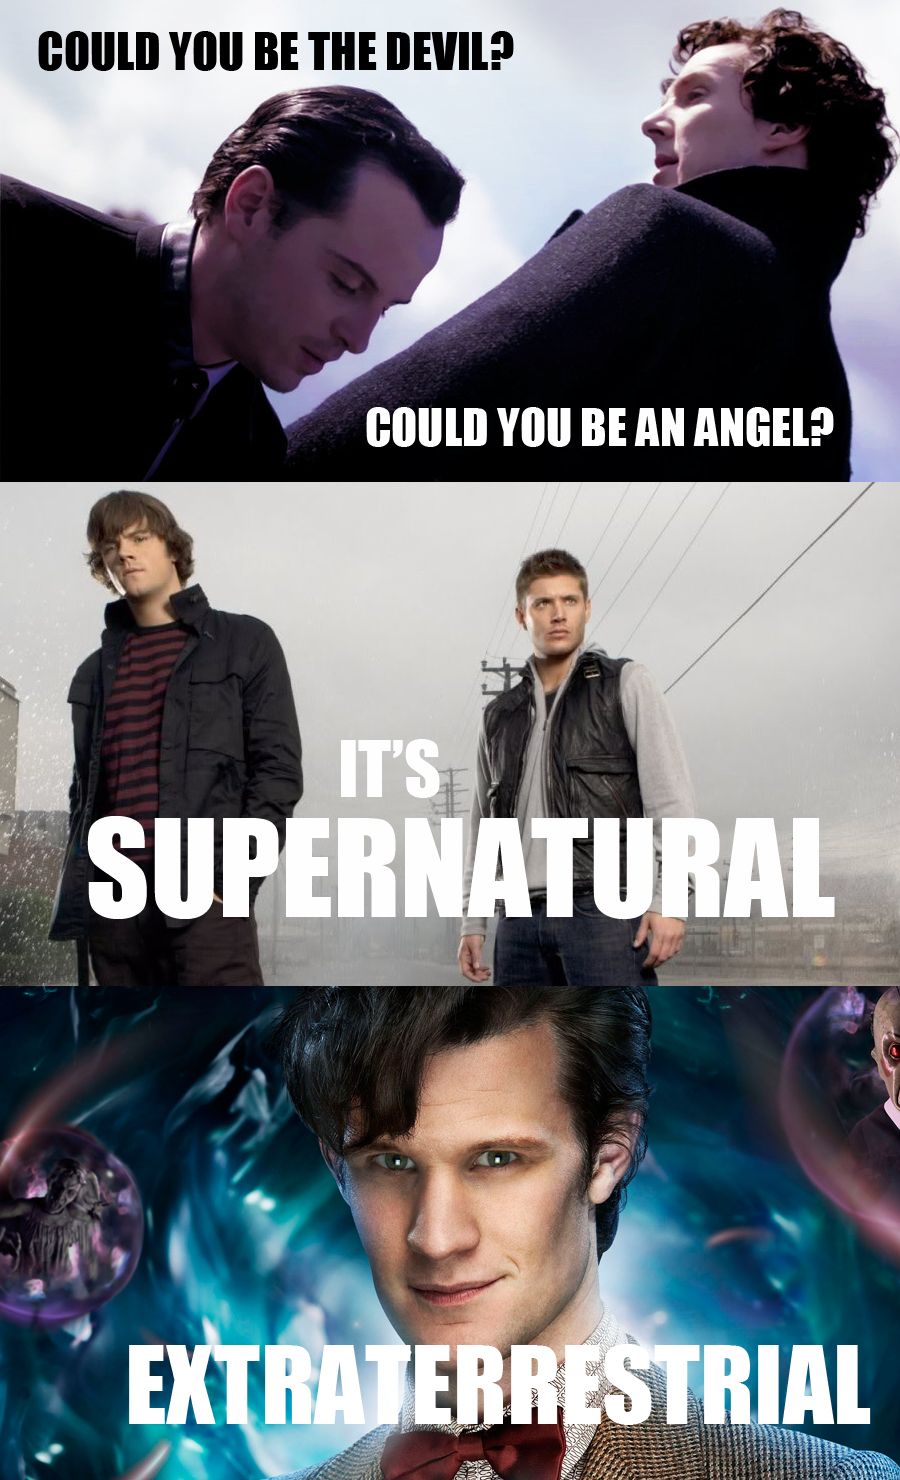 That awkward moment when you realize Katy Perry was singing about SuperWhoLock.